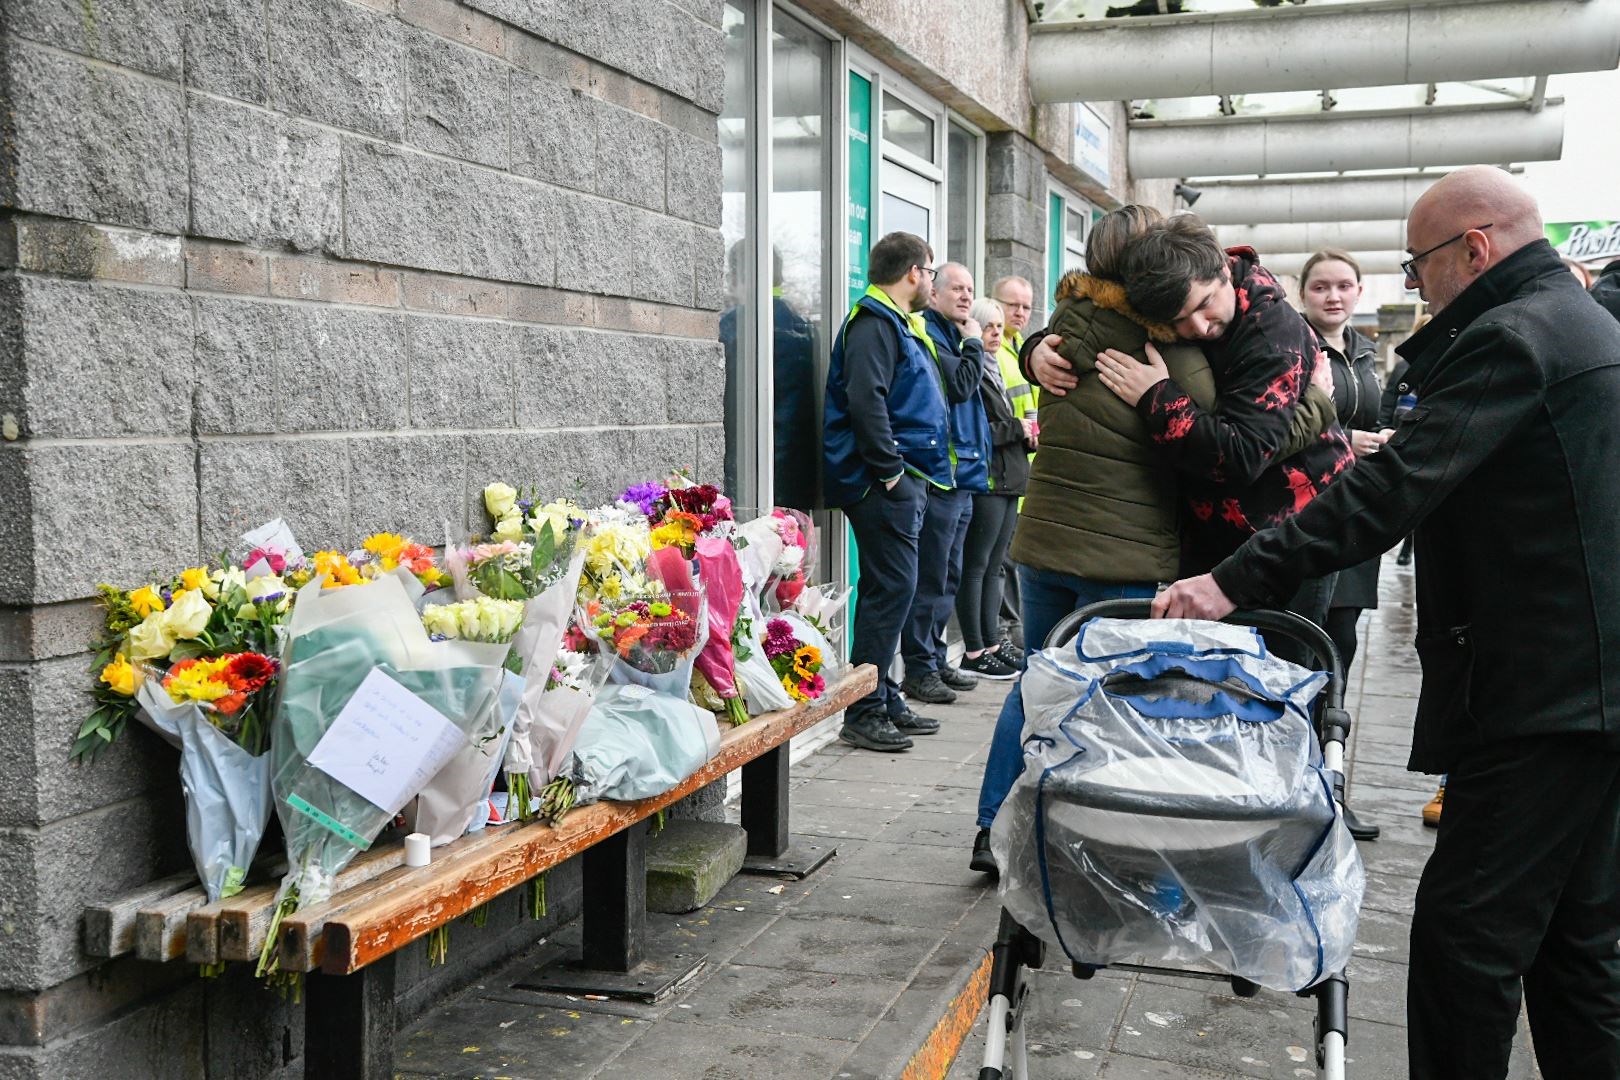 Tributes were paid to Keith Rollinson at Elgin Bus Station on Sunday. Picture: Beth Taylor